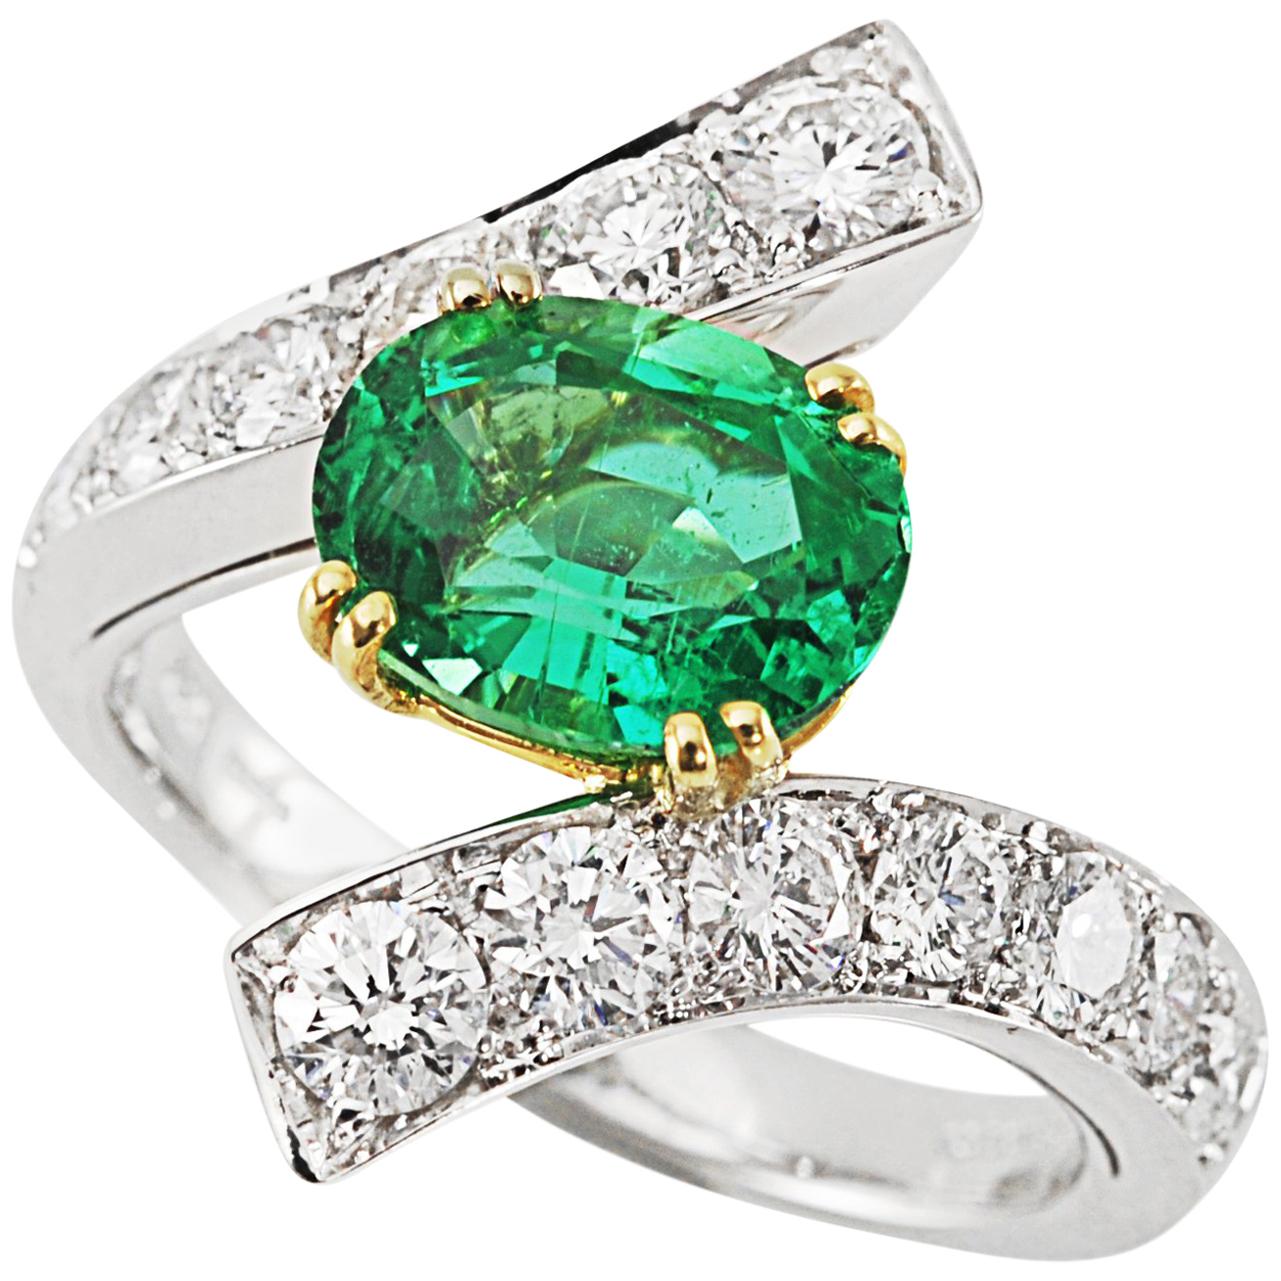 Picchiotti 18 Karat White and Yellow Gold Fashion Ring with Diamonds and Emerald For Sale